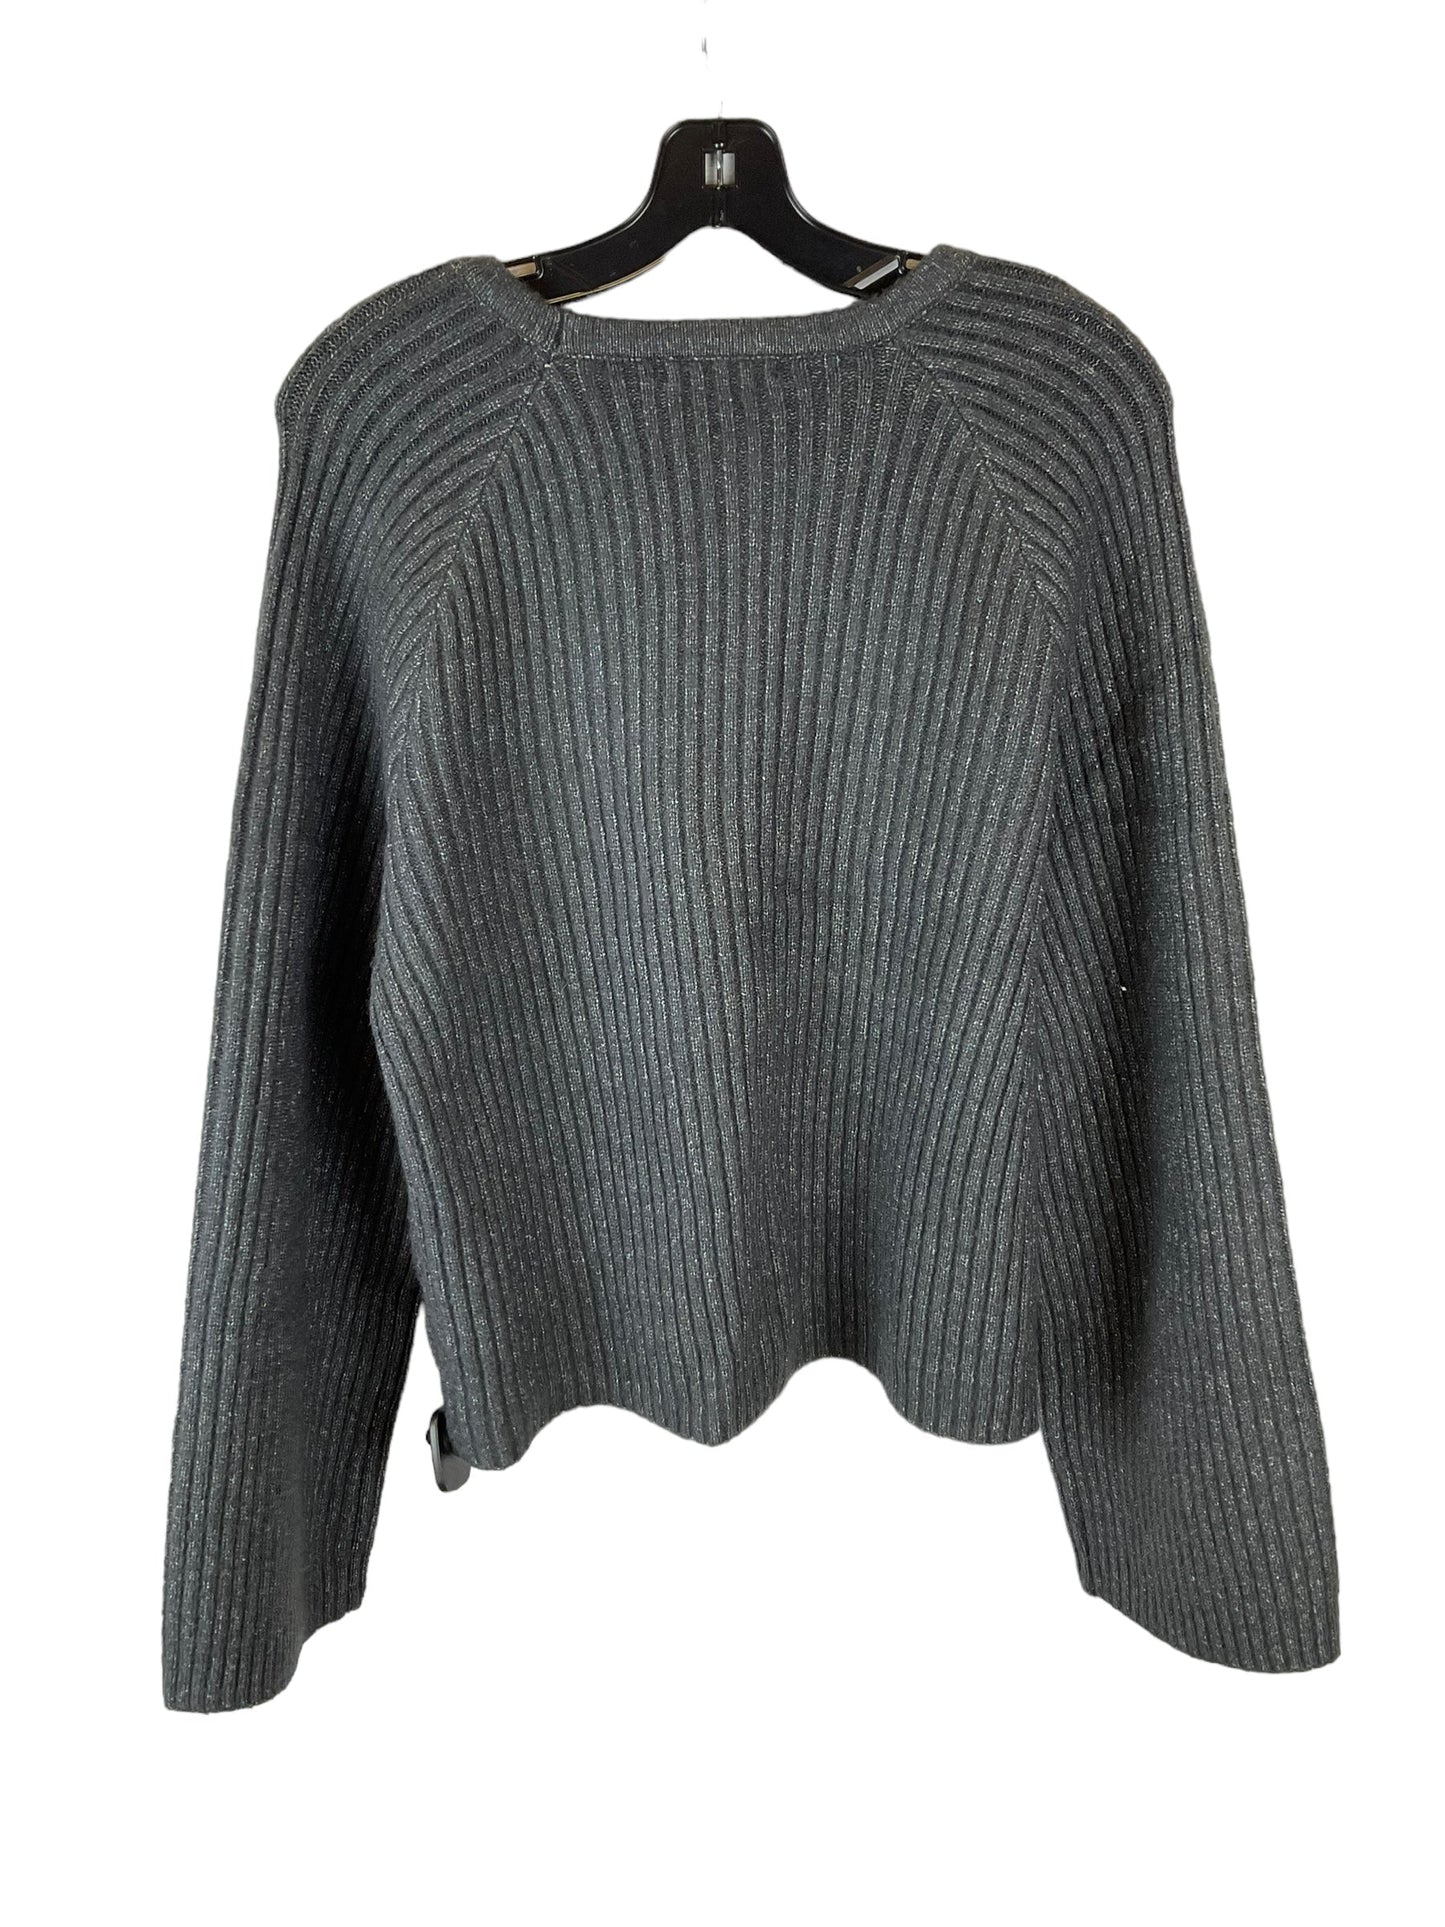 Sweater By Z Supply  Size: L